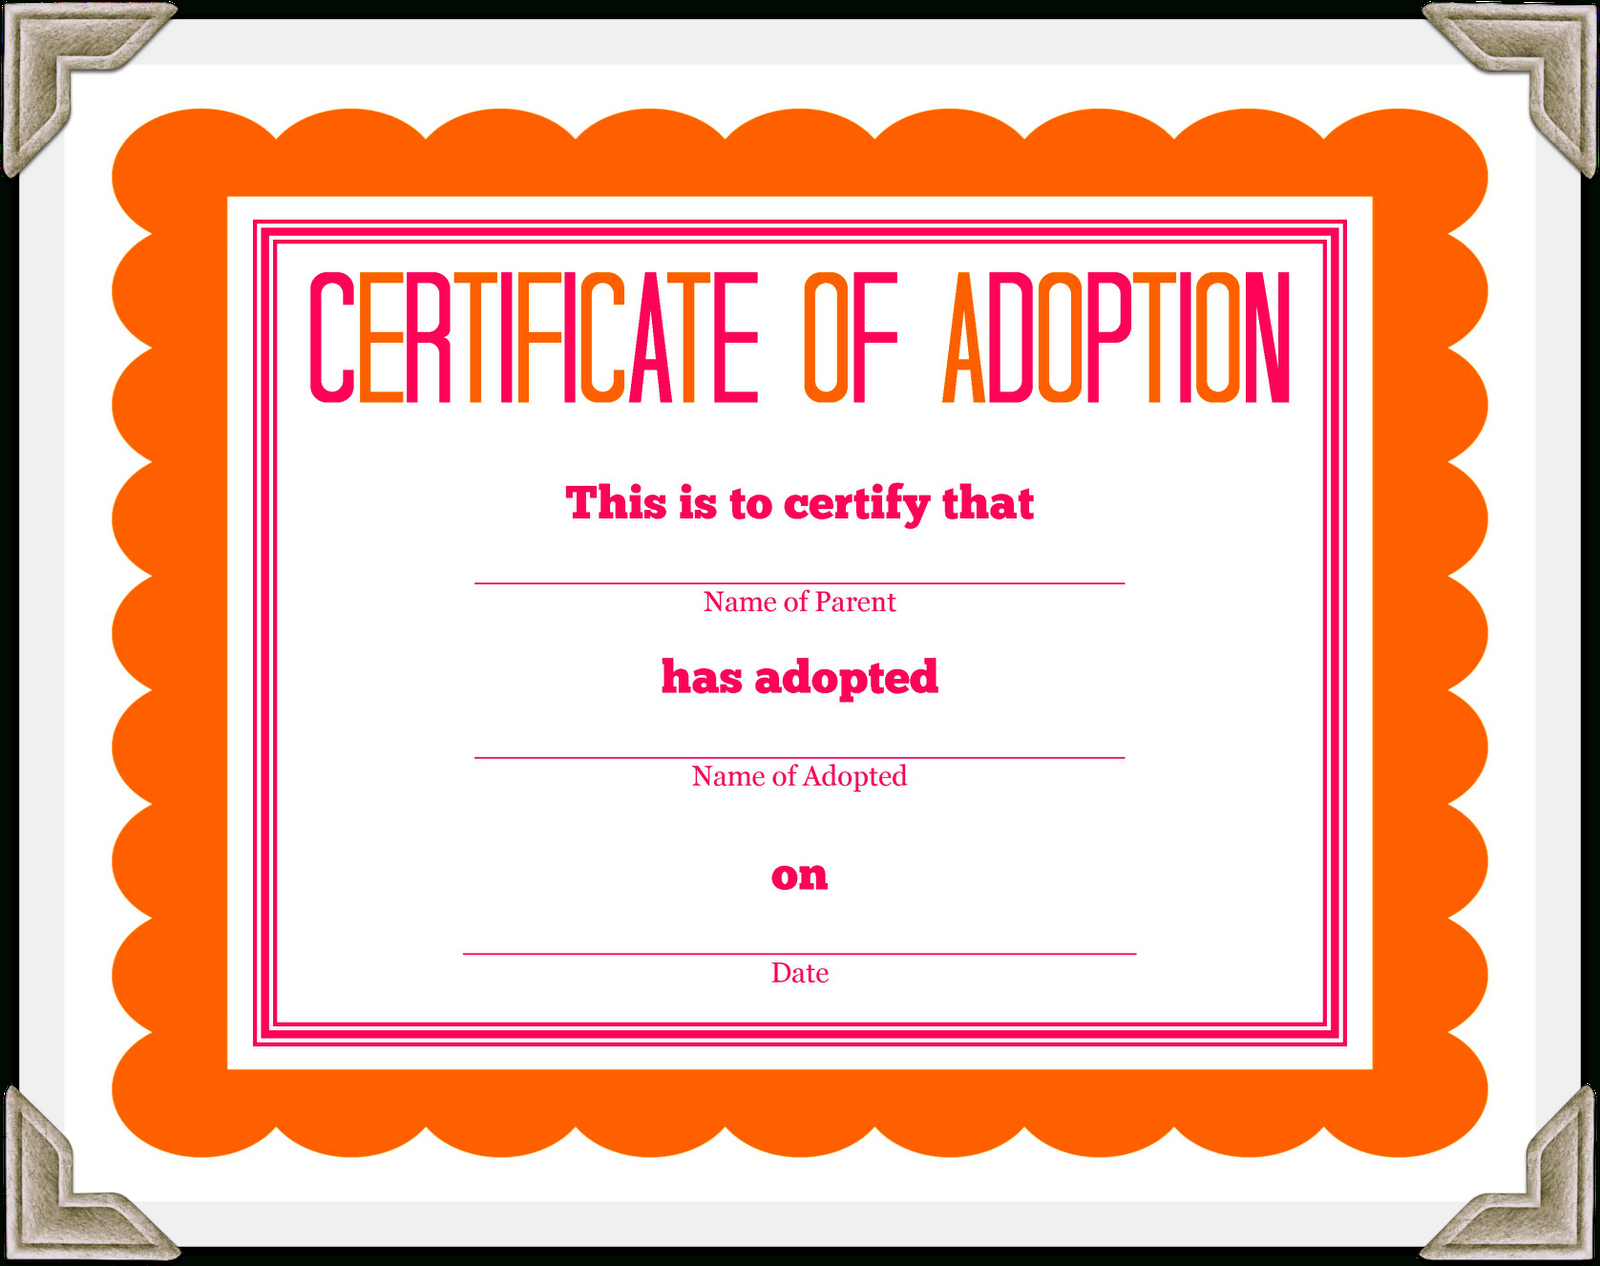 Kitten Adoption Certificate In Toy Adoption Certificate Template